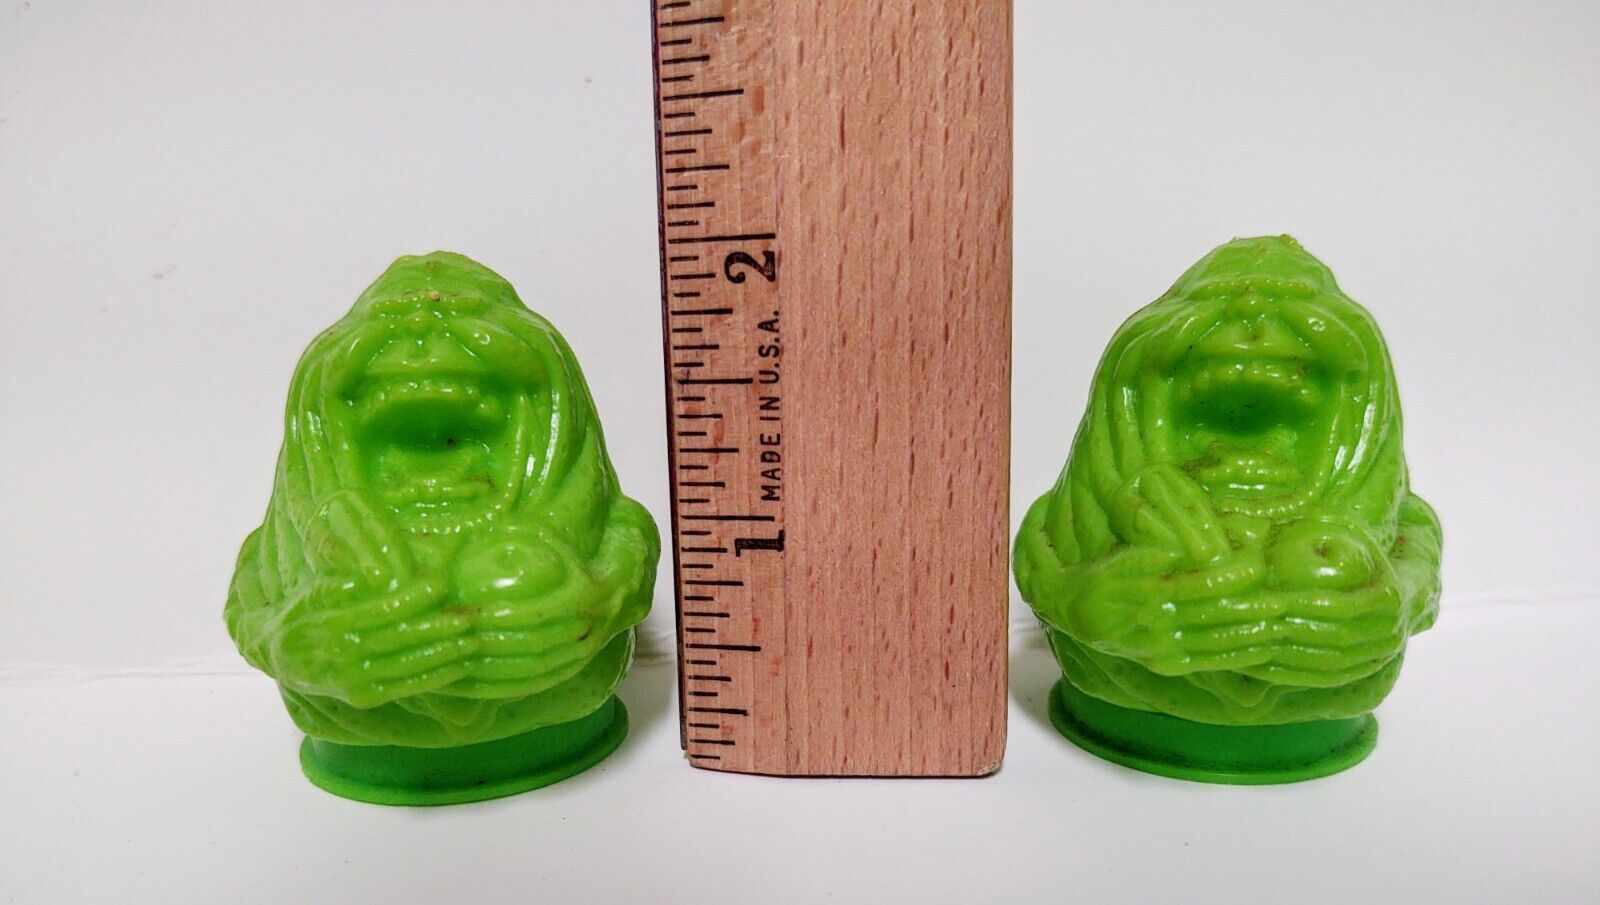 Vintage Ghostbusters Green Slime Columbia Pictures Green Salt & pepper shakers